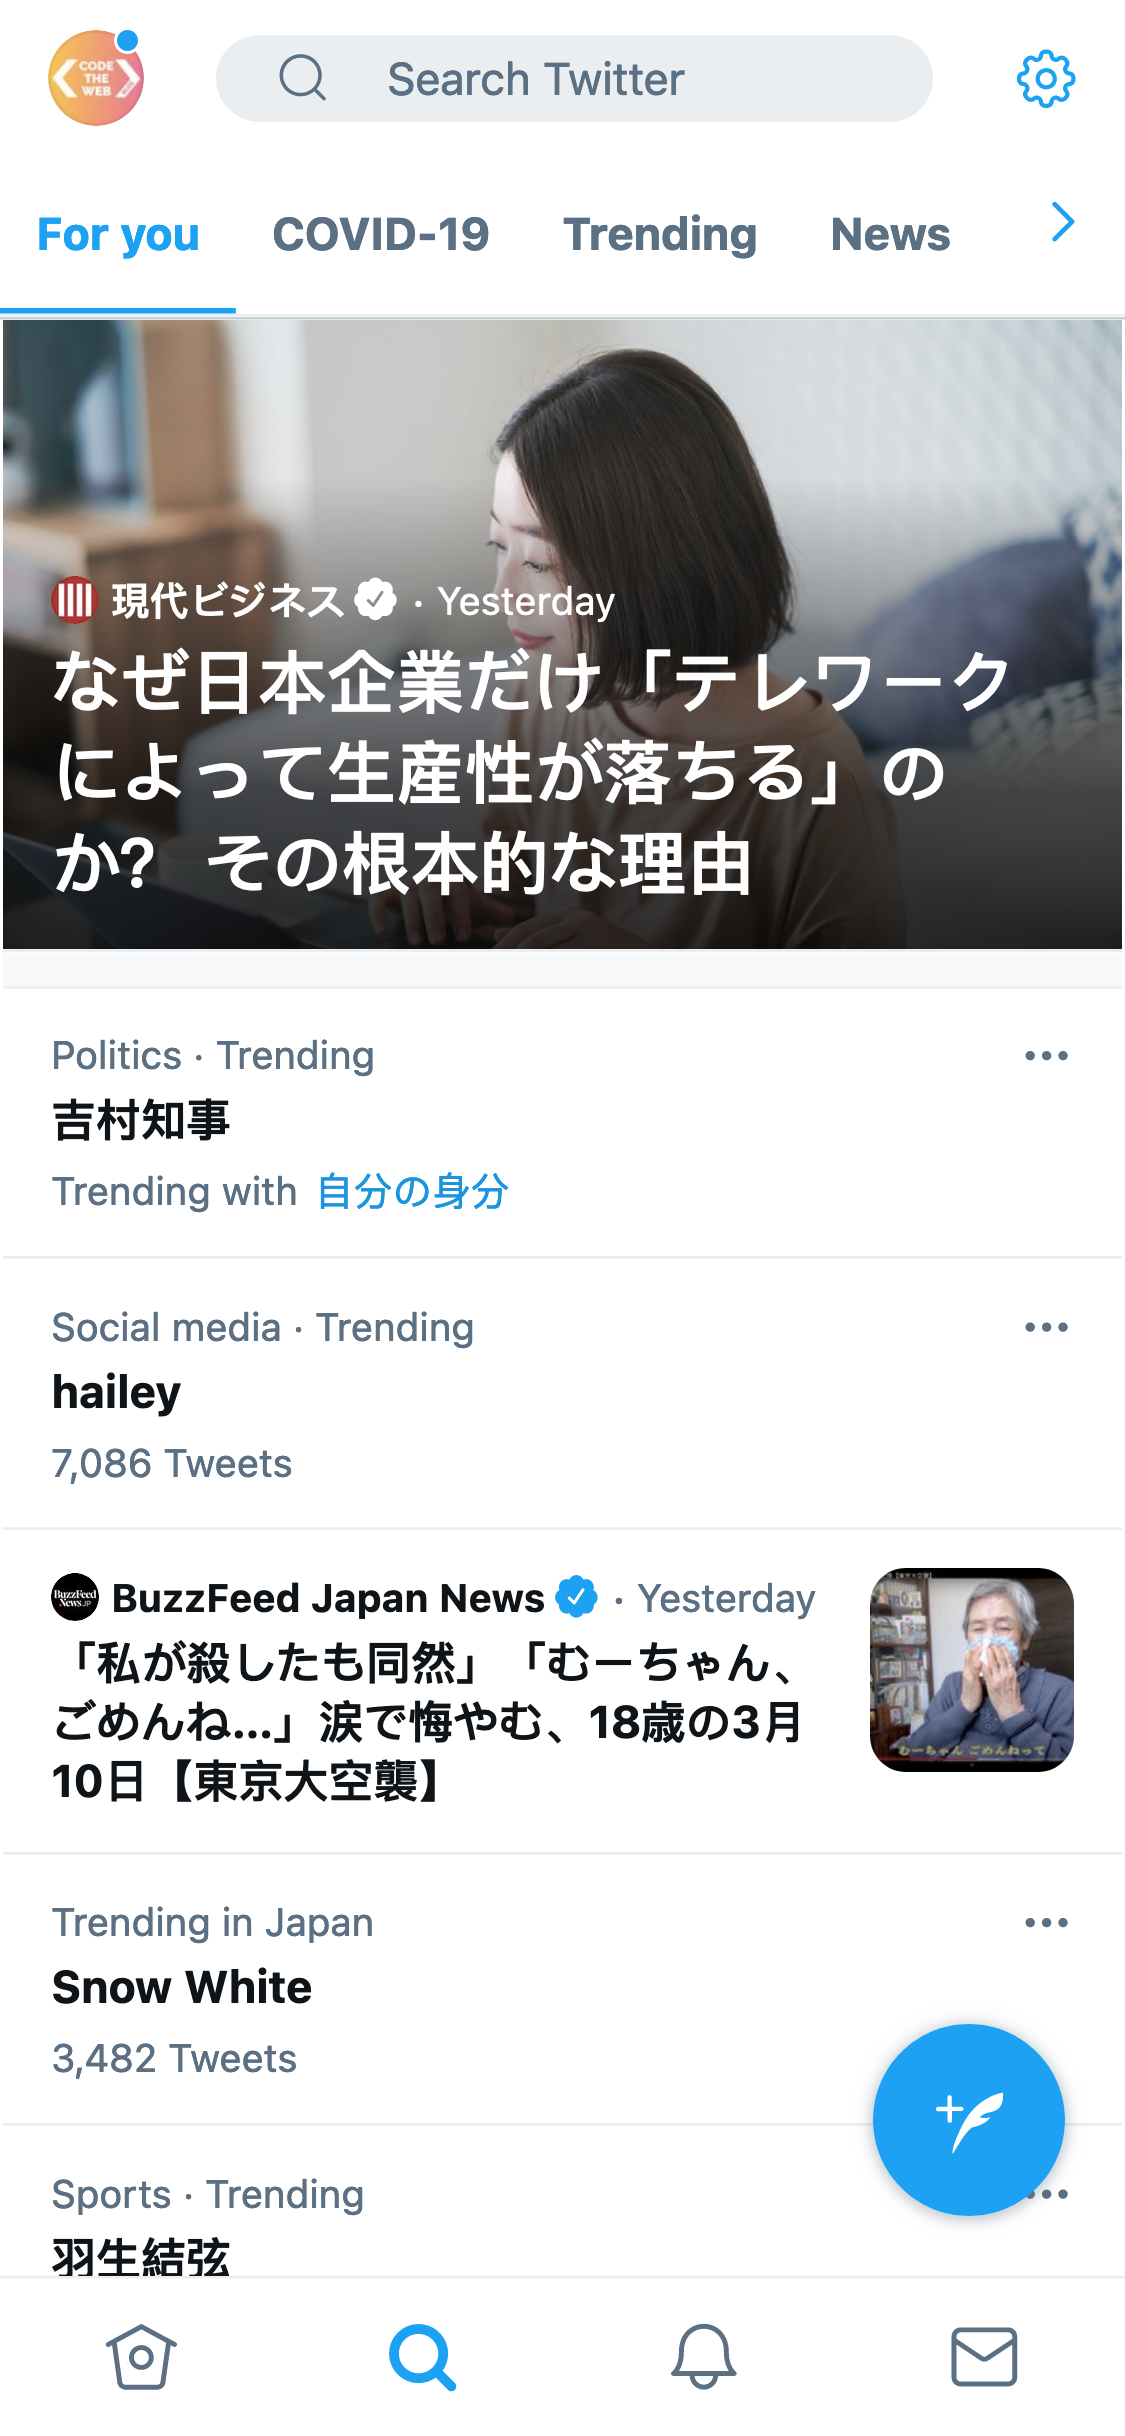 My Twitter Explore page in Japanese